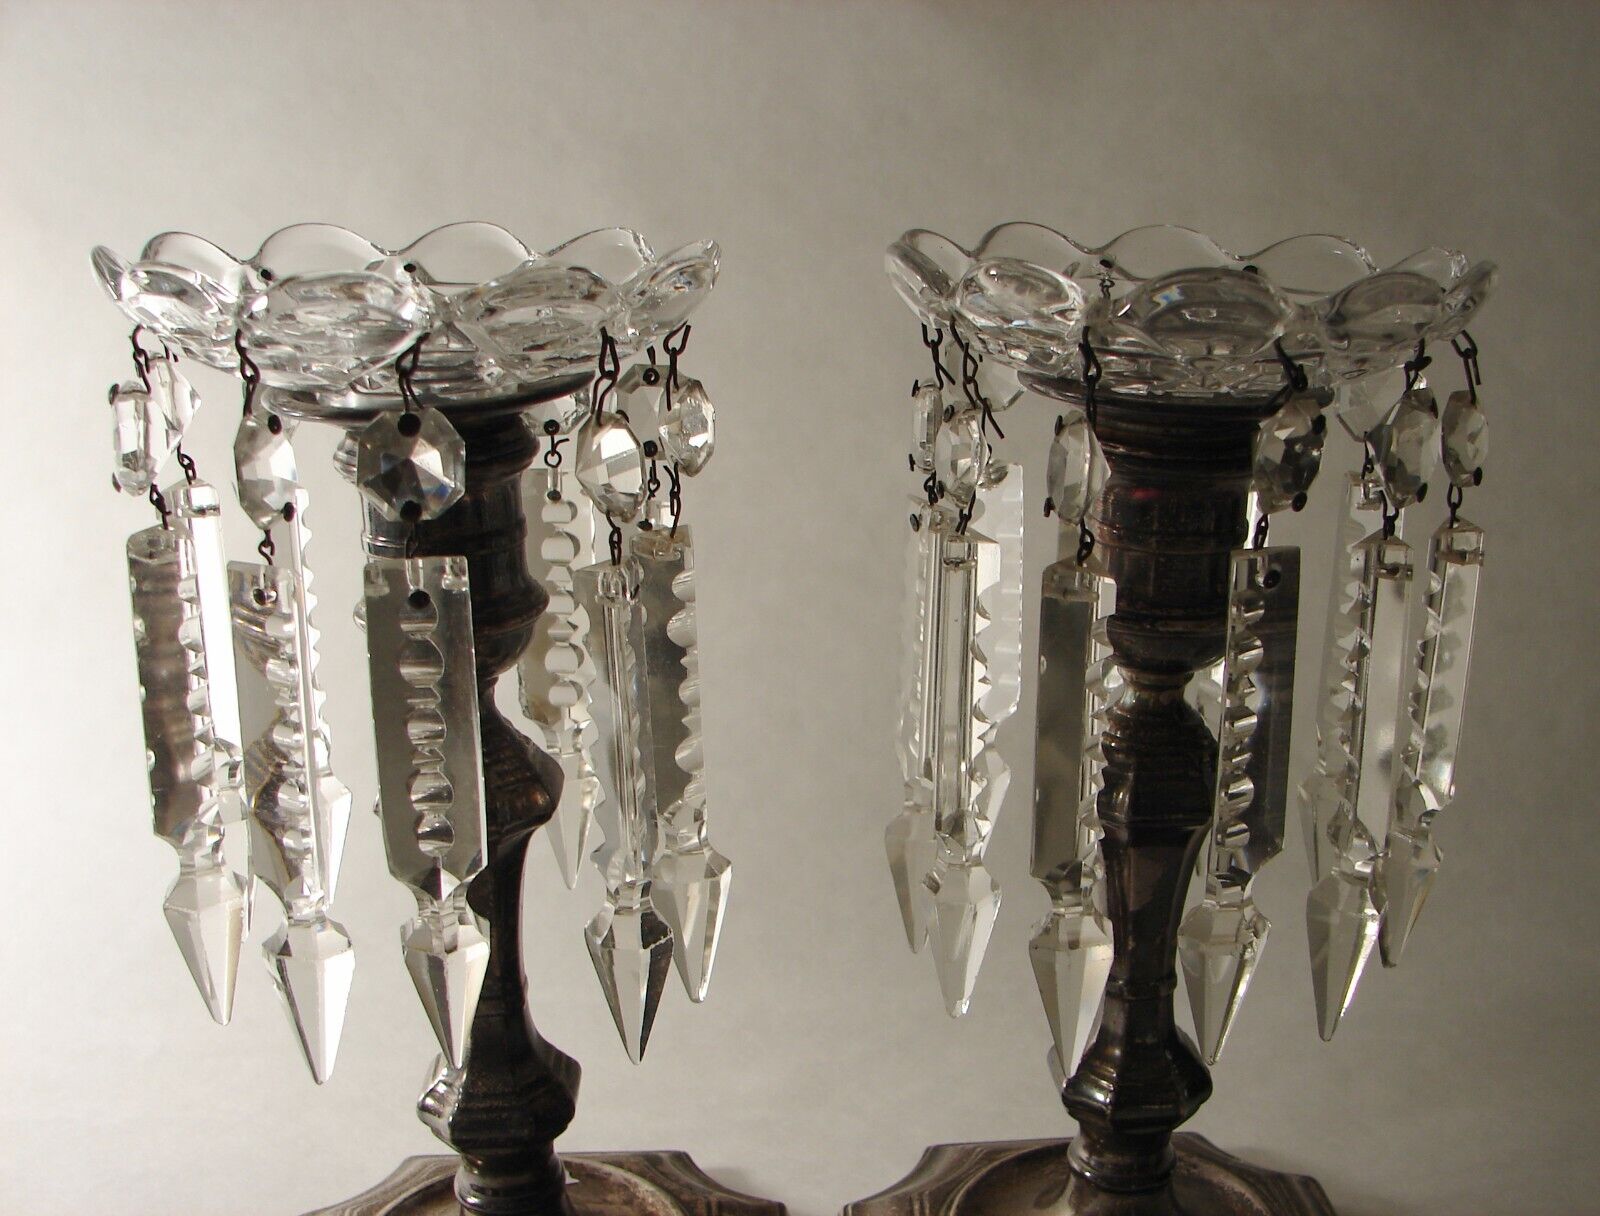 2 Antique Cut Crystal Bobeche with Prisms Replacement Parts for Candle Holders